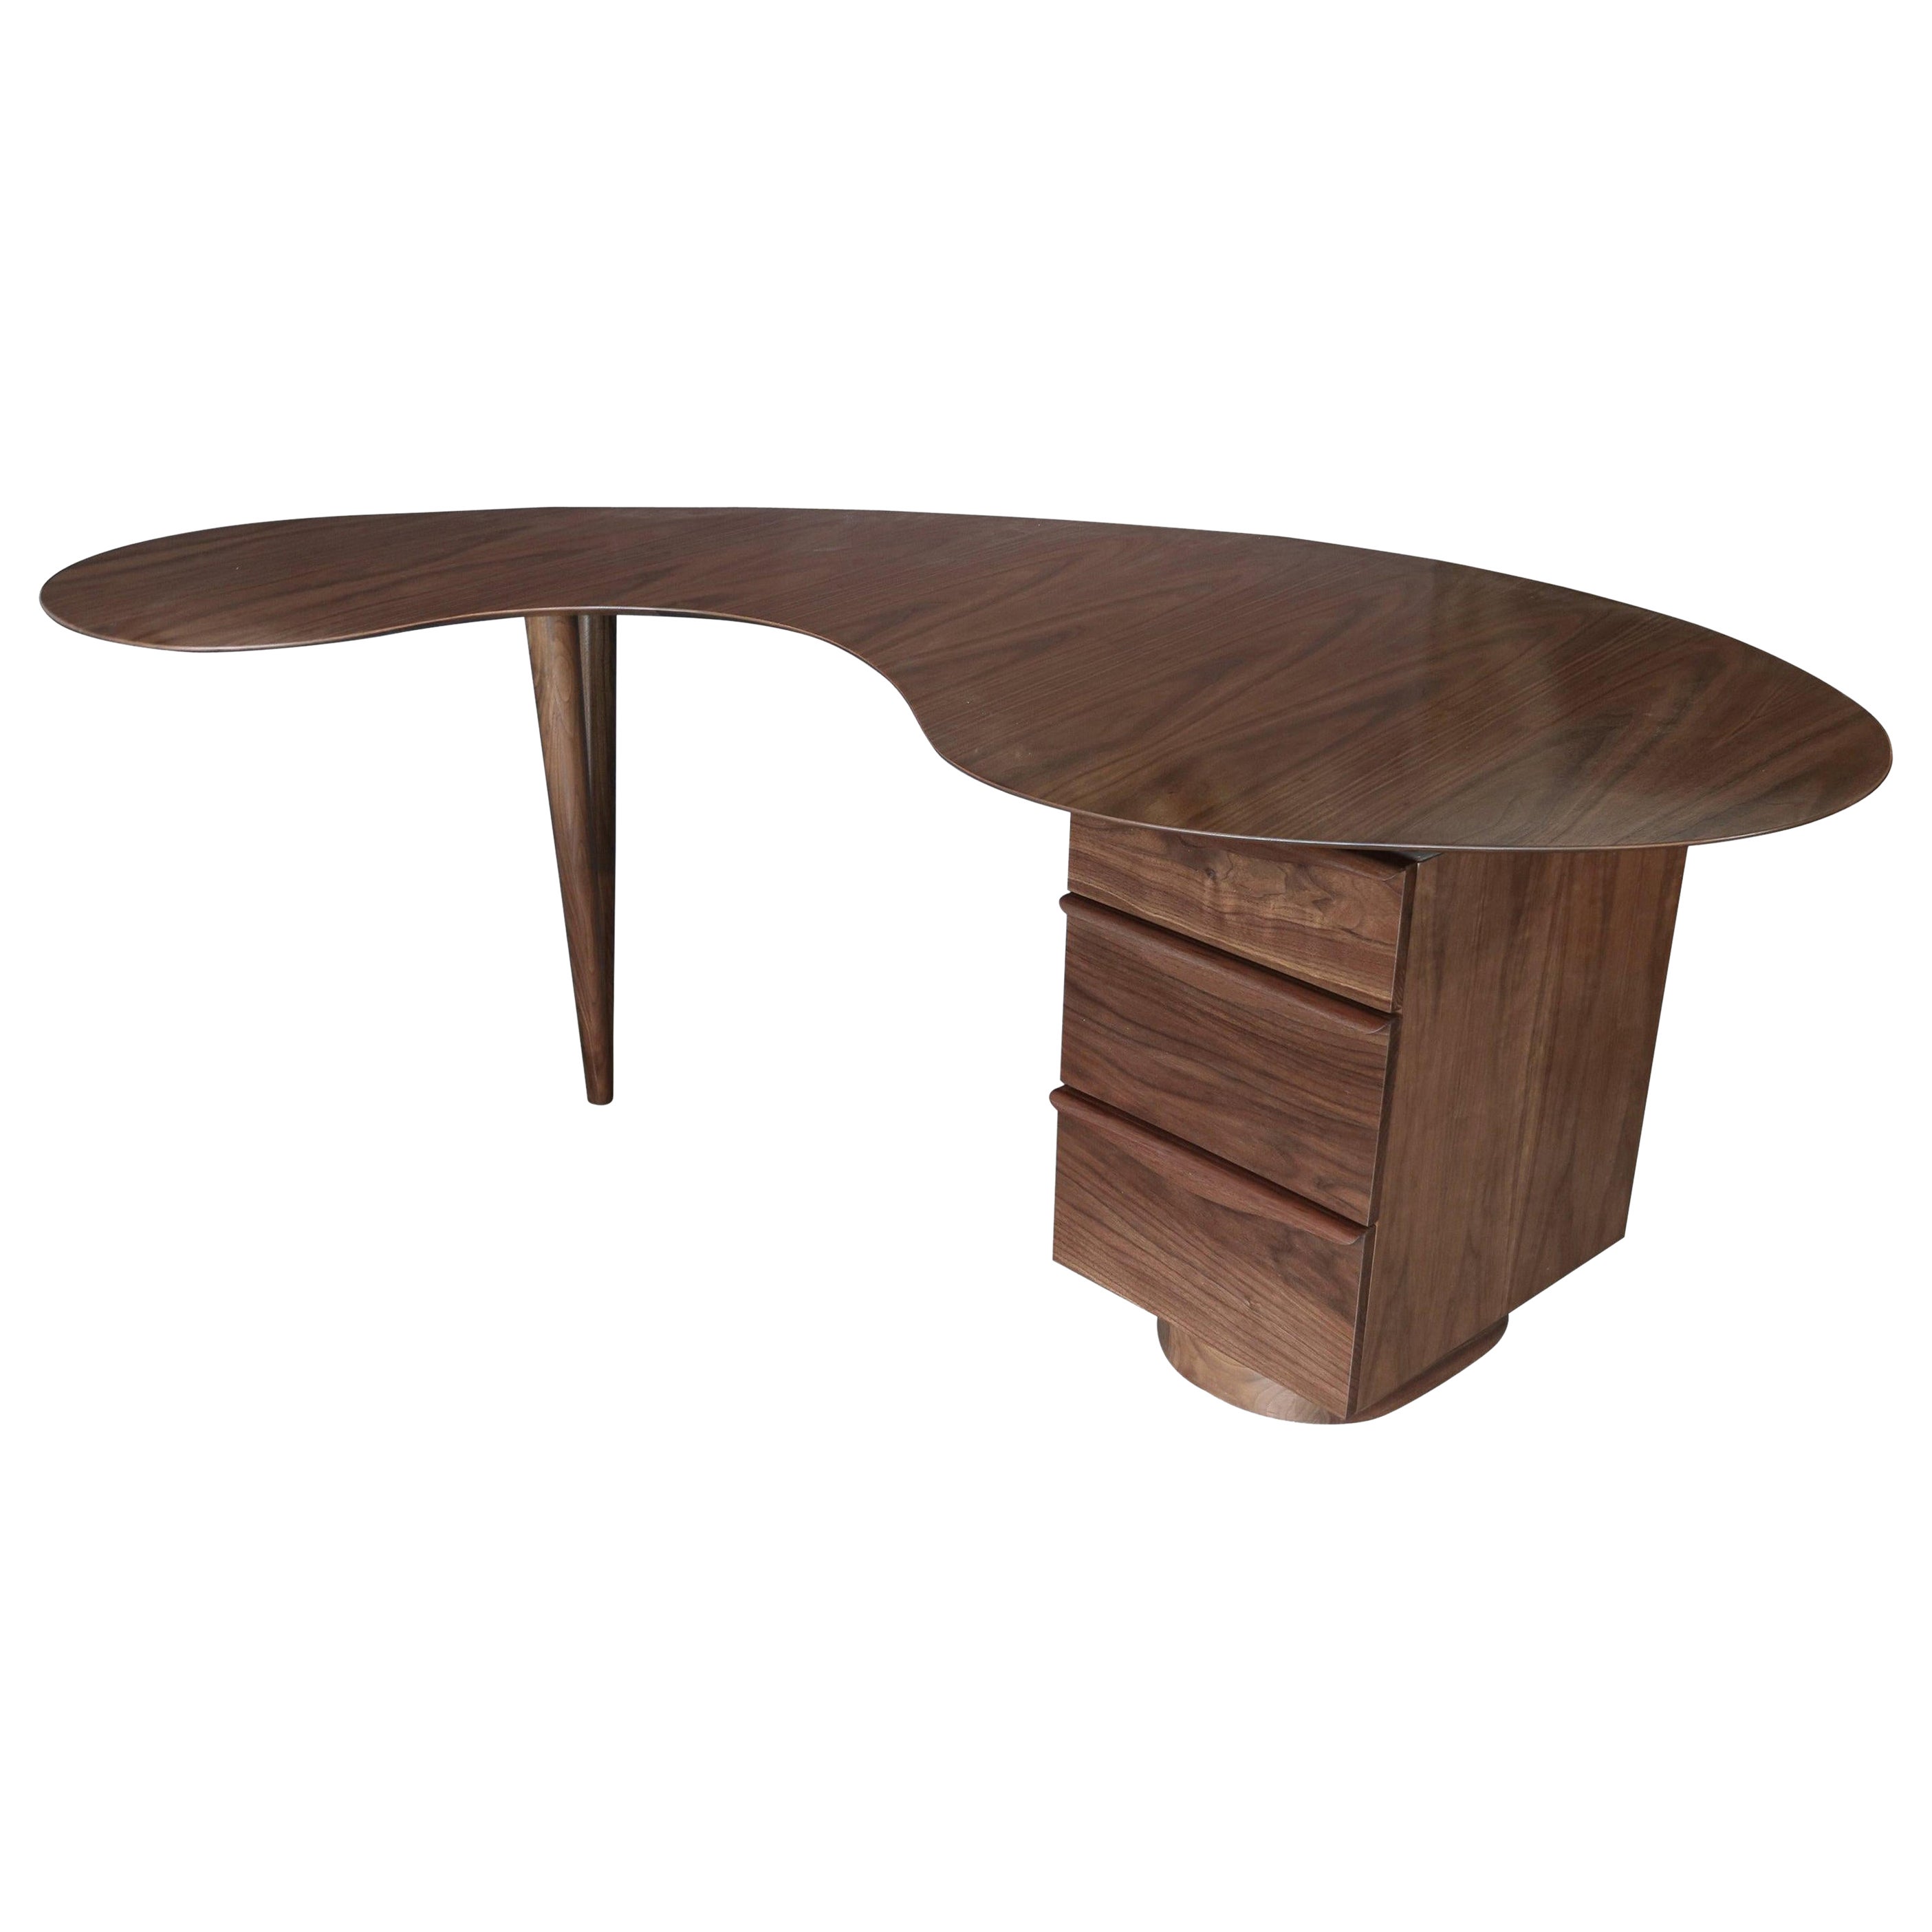 Custom Midcentury Style Curved Walnut Desk by Adesso Imports For Sale